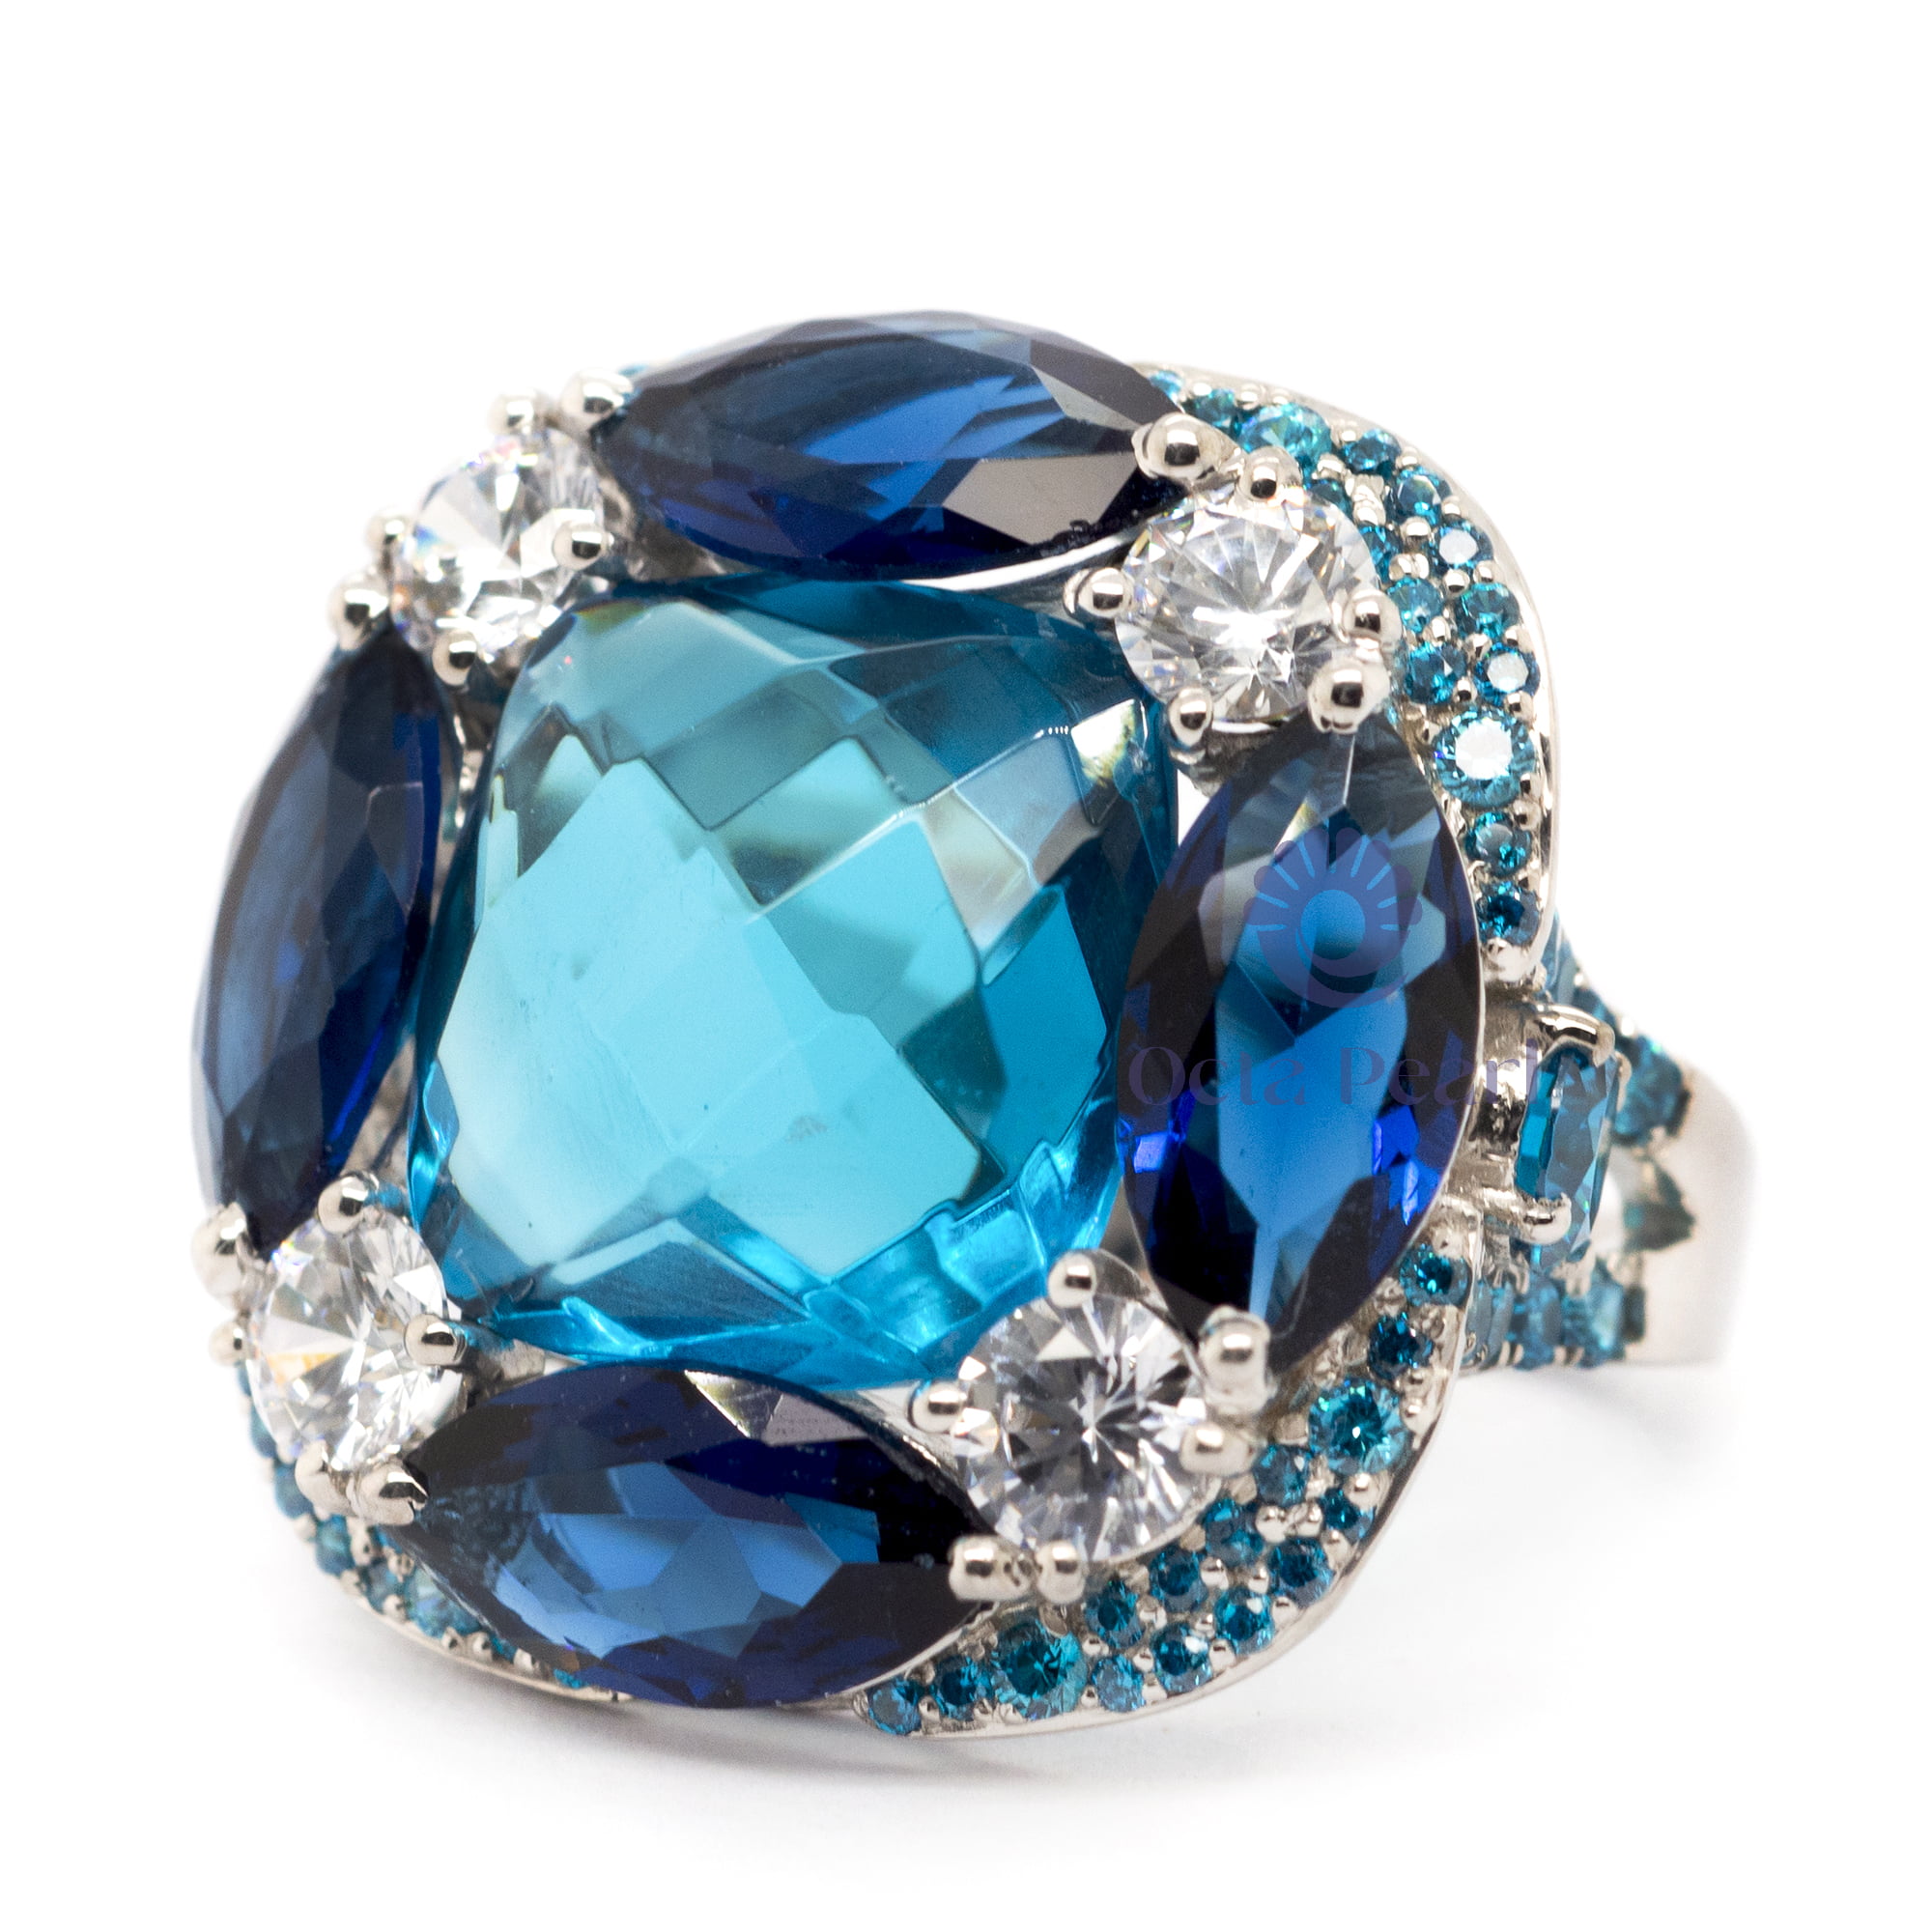 Aqua Cushion & Round With Blue Marquise CZ Stone Cocktail Ring (21 8/9 TCW)